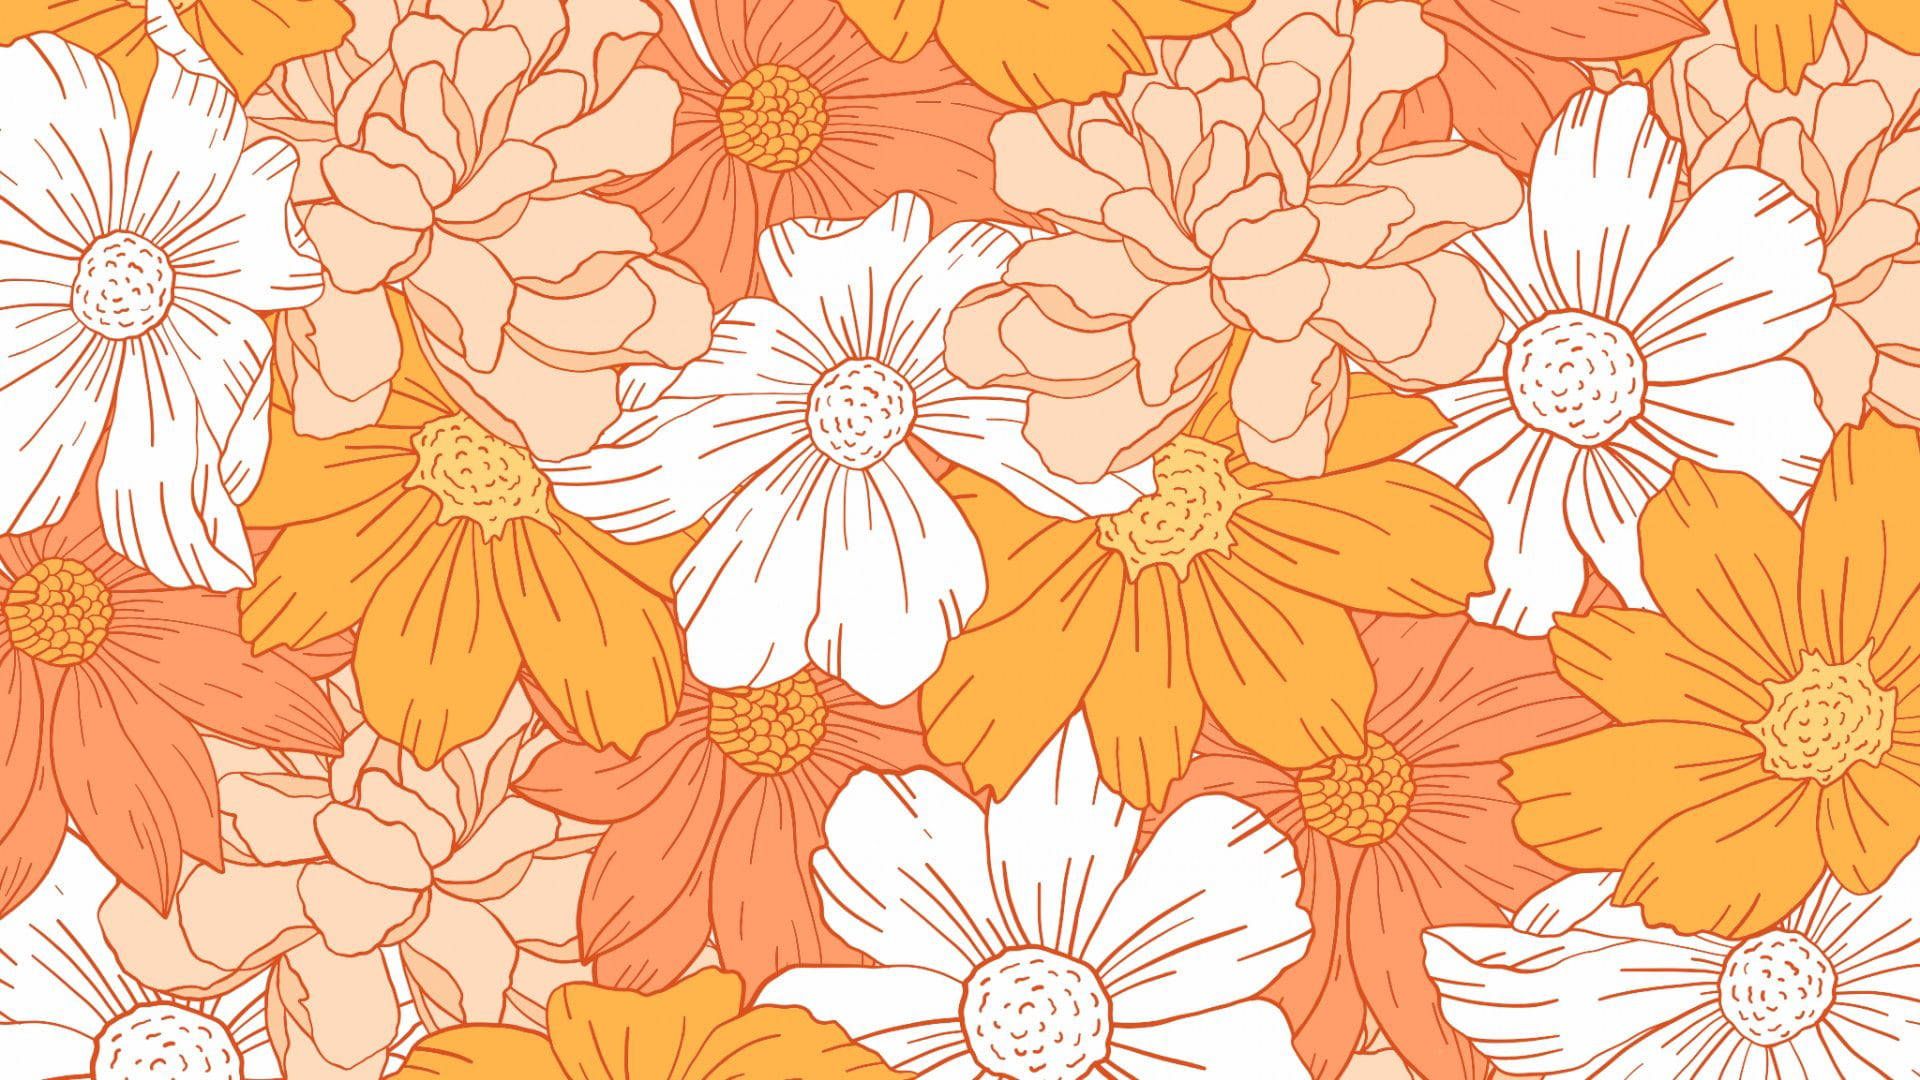 A pattern of orange and white flowers on a pink background - Orange, warm, April